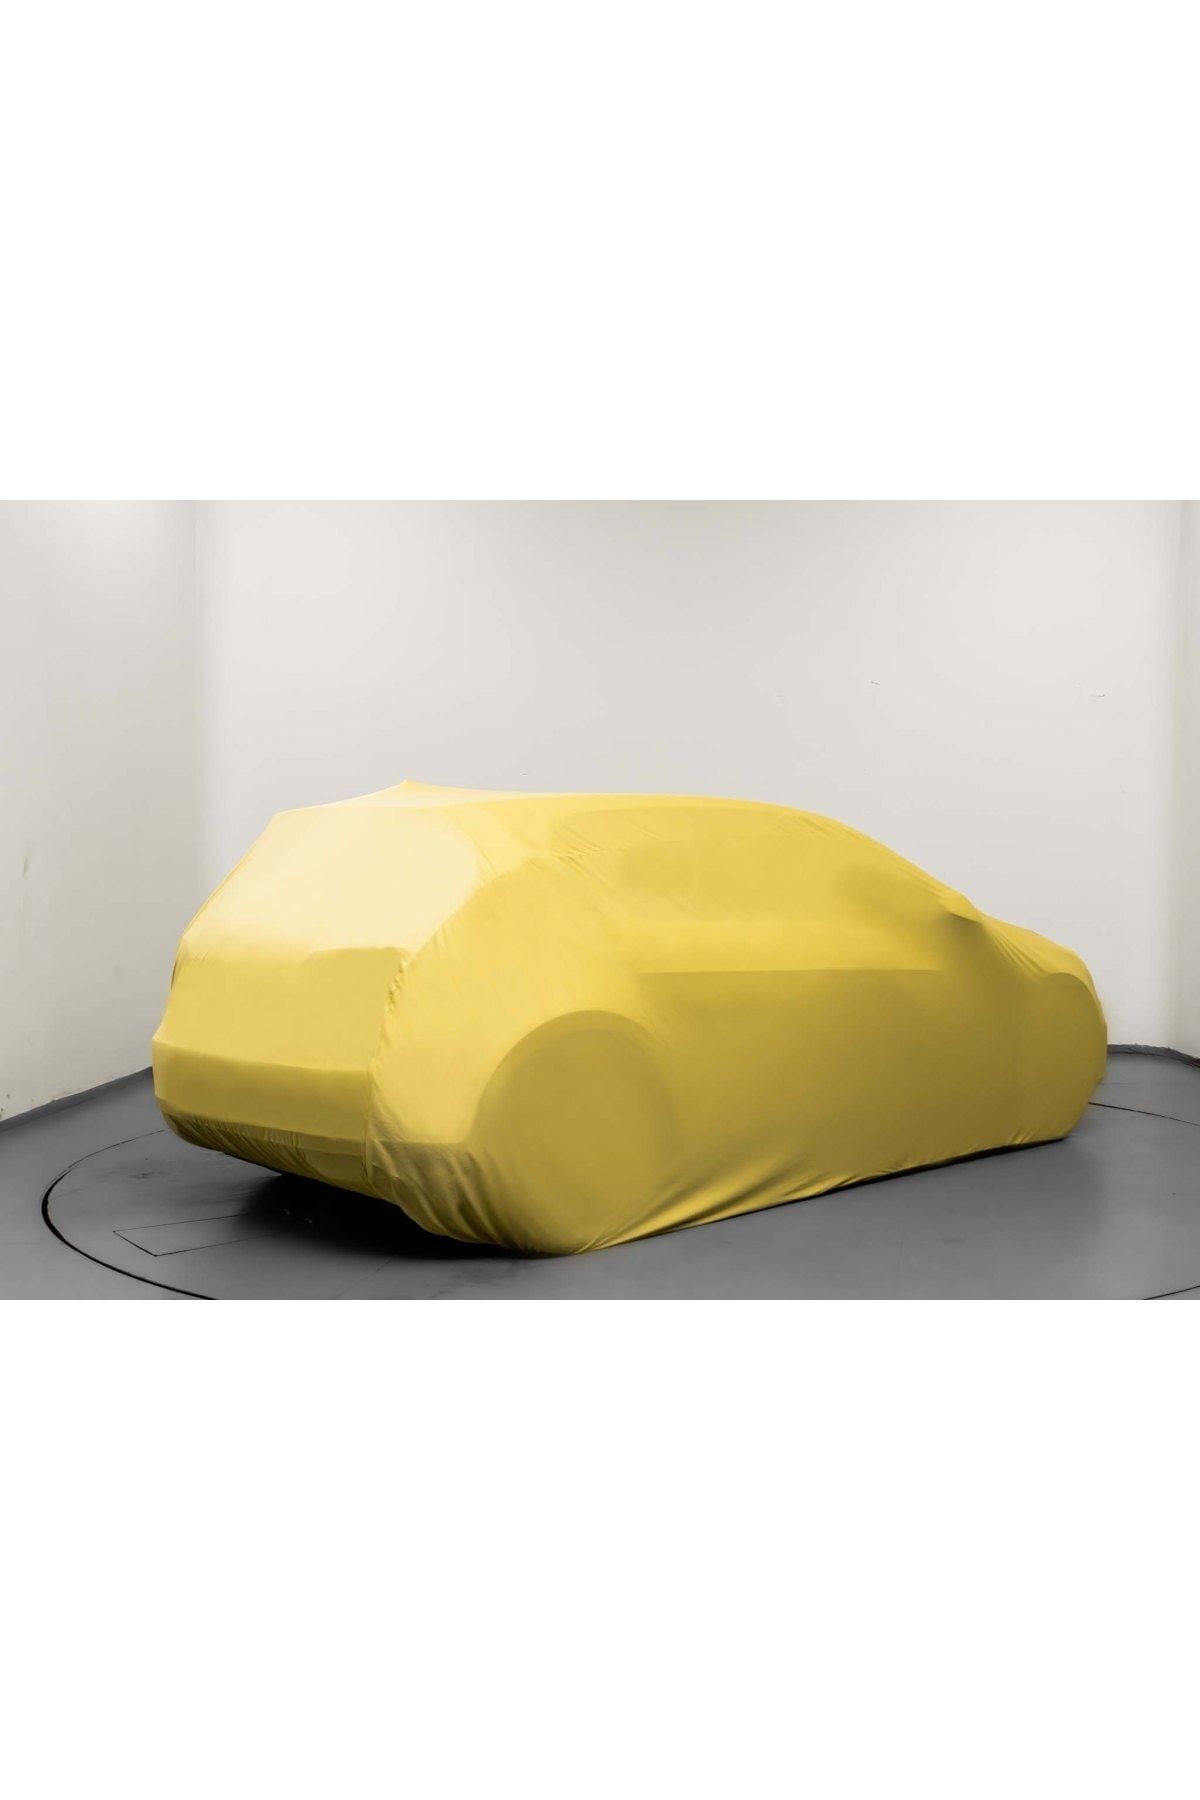 Teksin Nissan 350z Yellow Automobile Fabric Combed Cotton Car